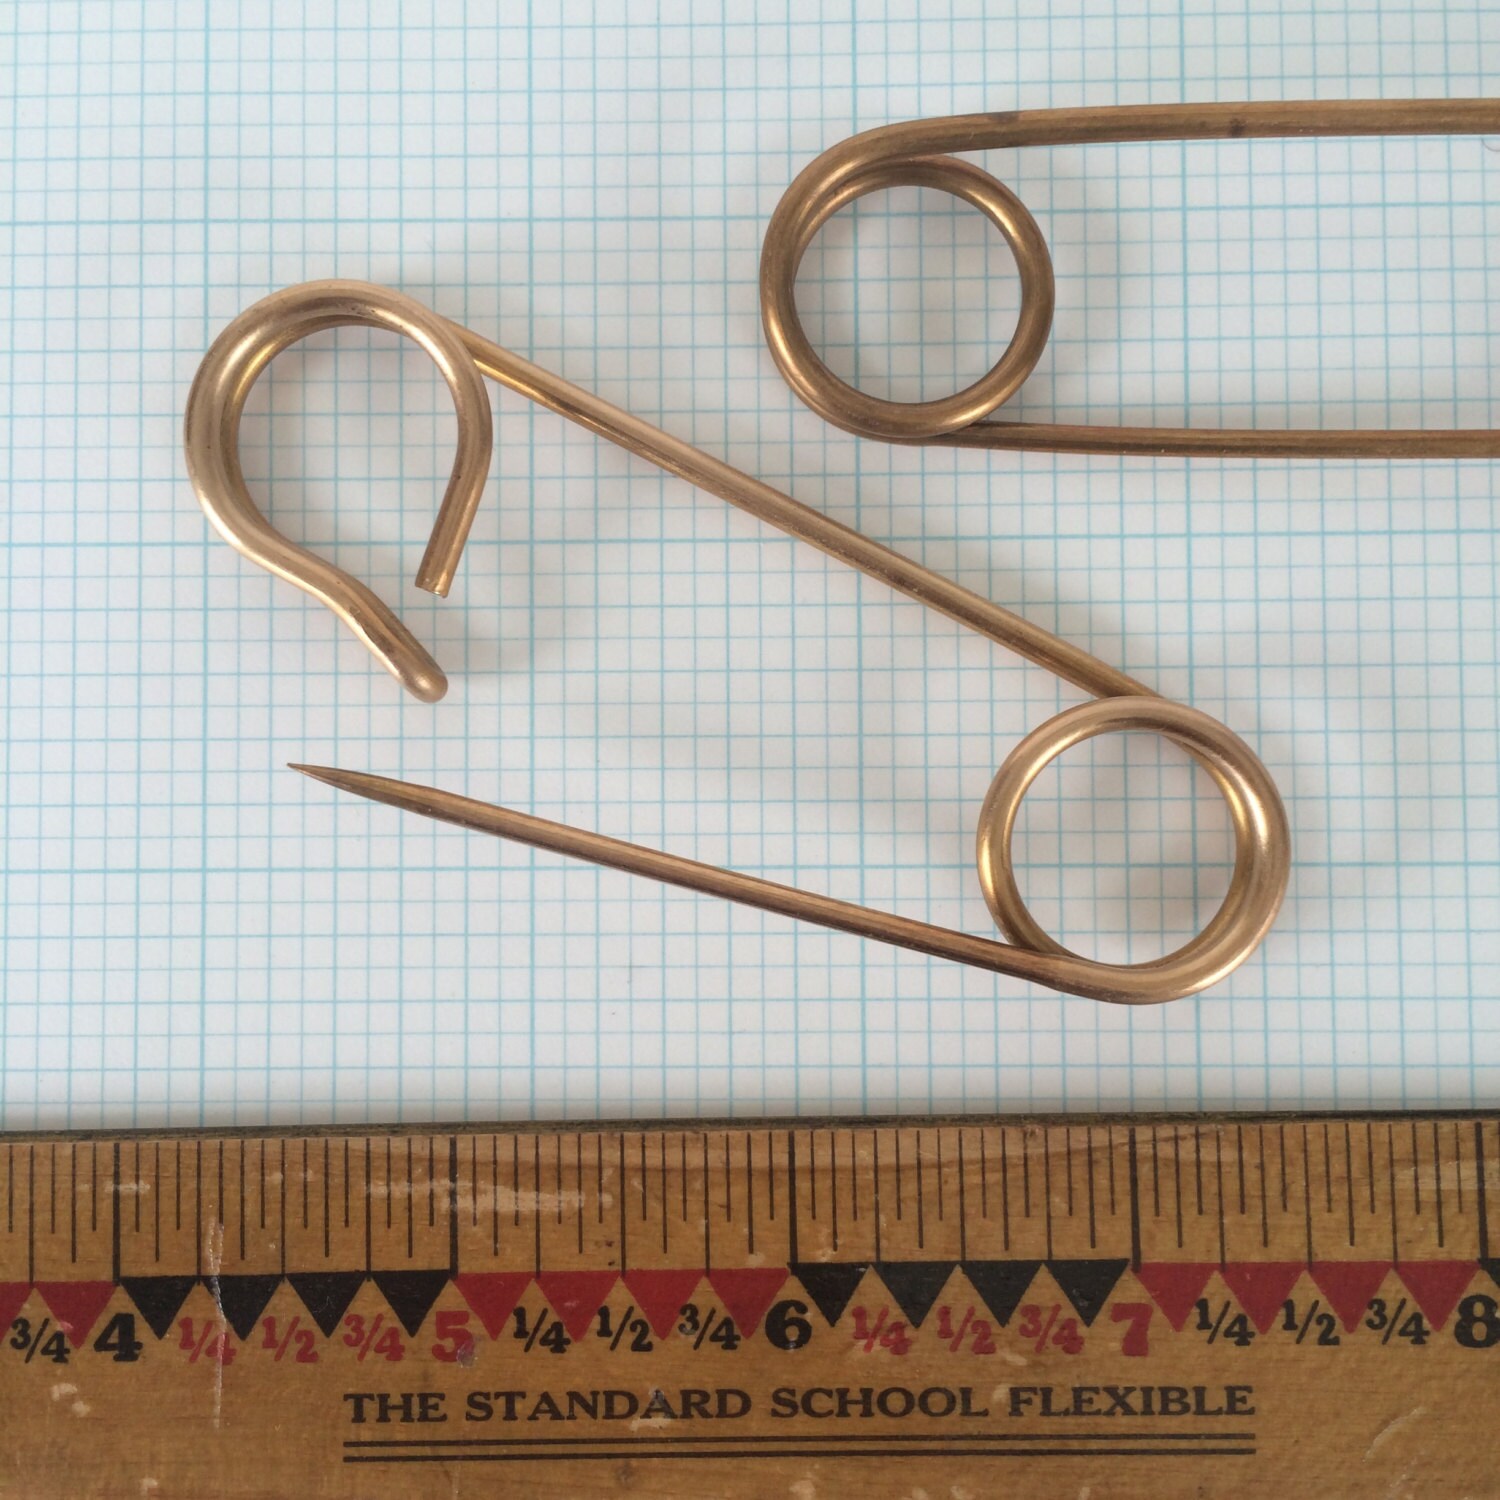 2 Inch/5cm Safety Pin, Two Inch Kilt Pin, Boutonniere Pin, DIY